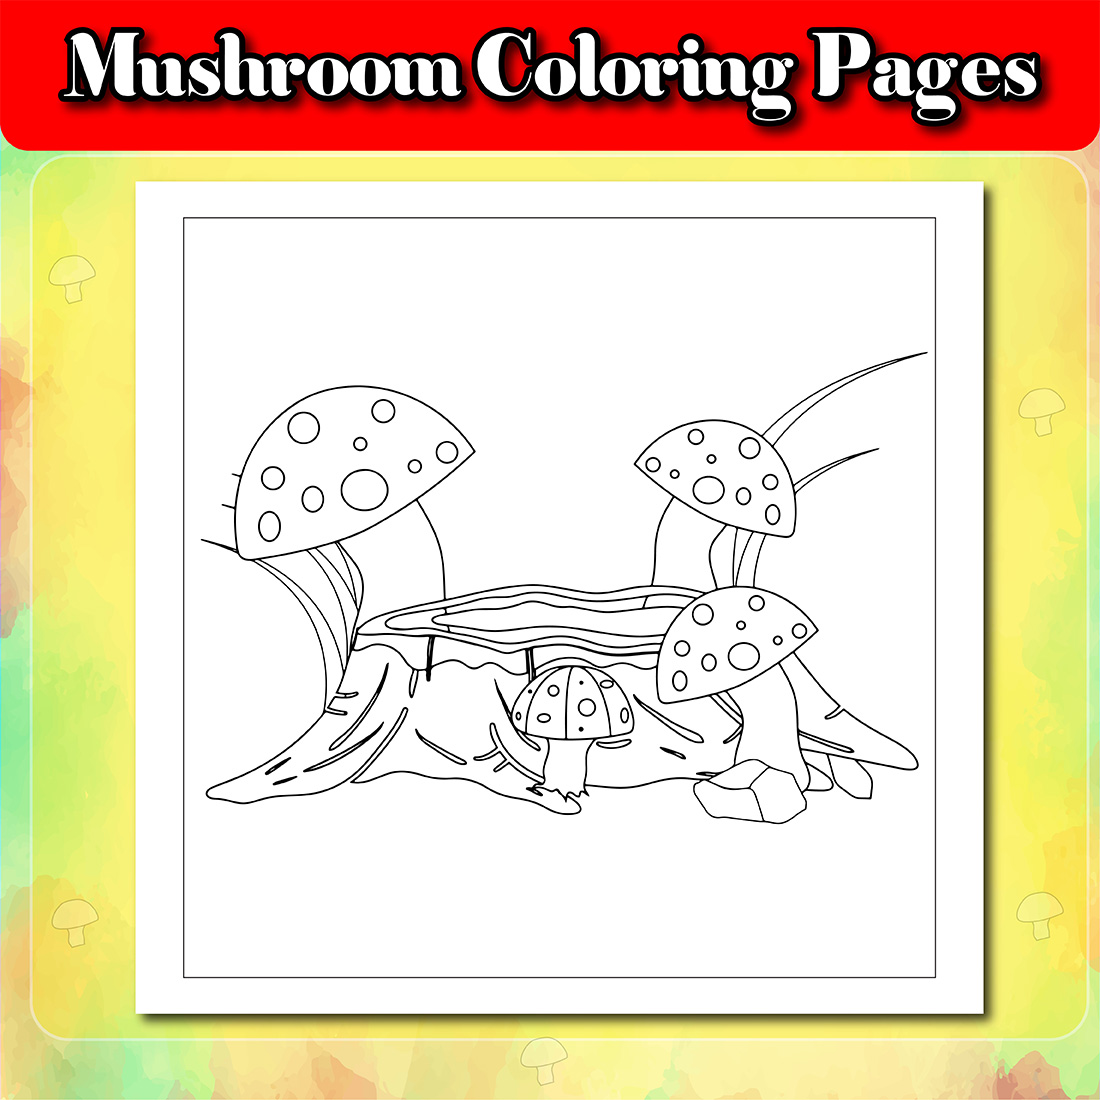 Mushroom Coloring Pages cover iamge.